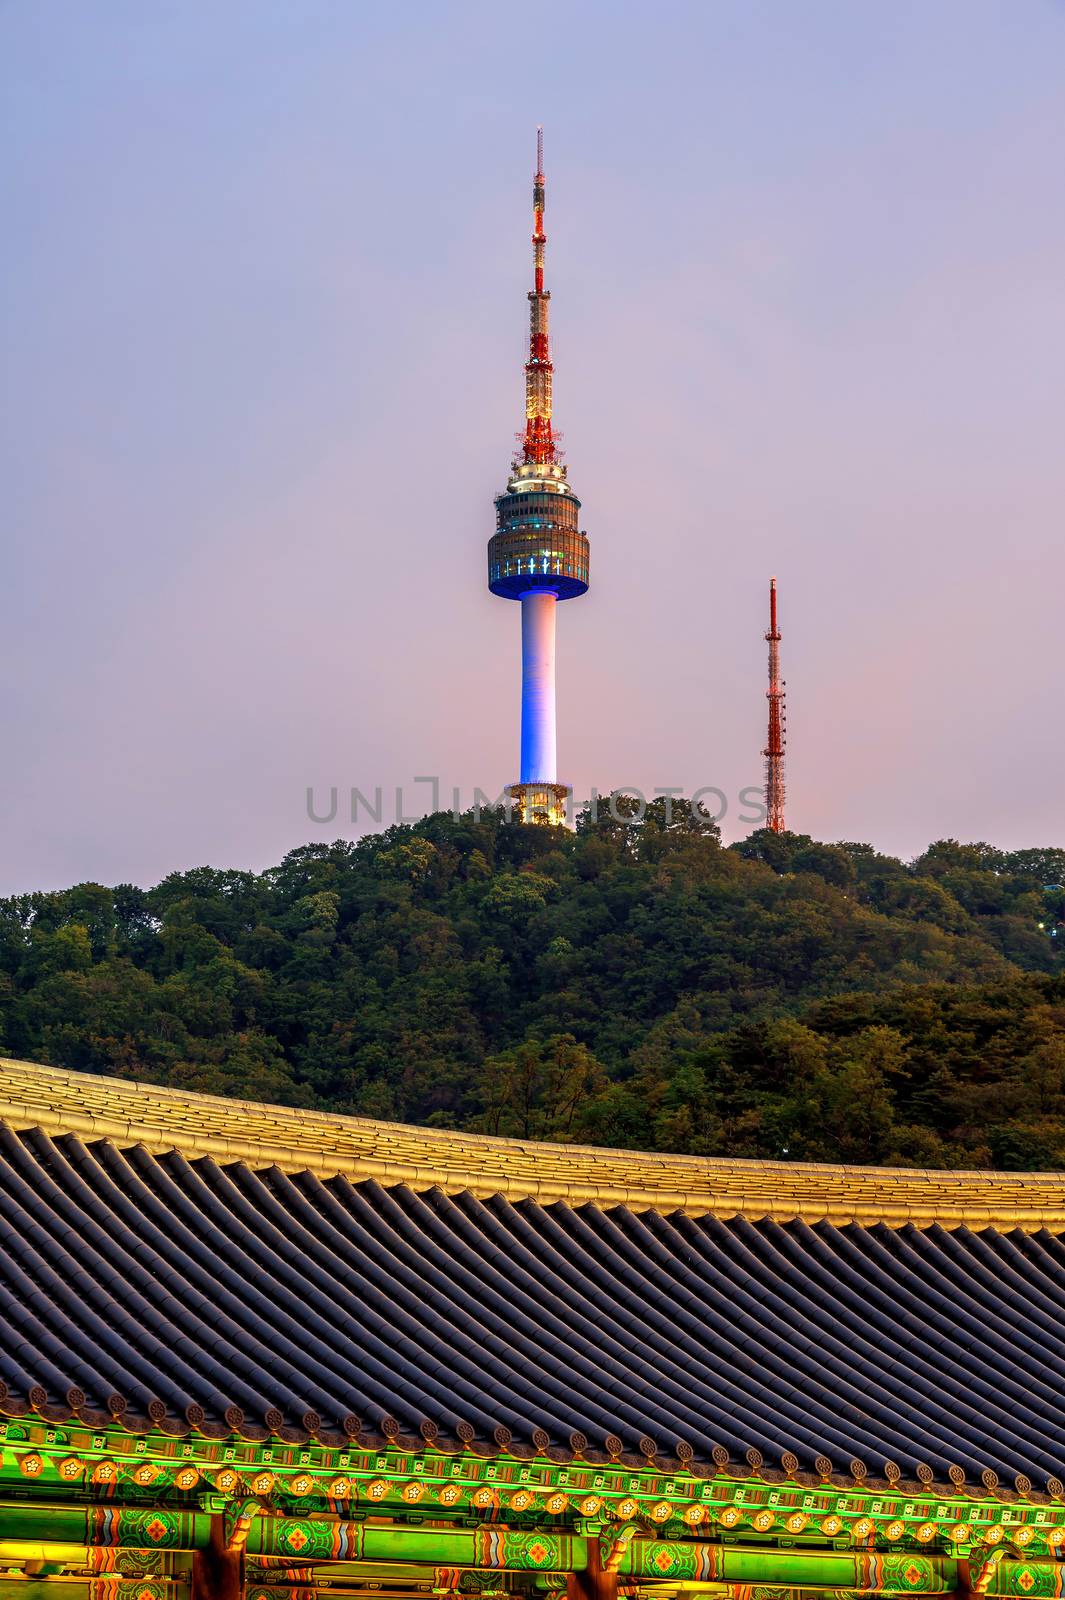 Namsangol Hannok Village and Seoul Tower Located on Namsan Mountain at night in Seoul,South Korea. by gutarphotoghaphy